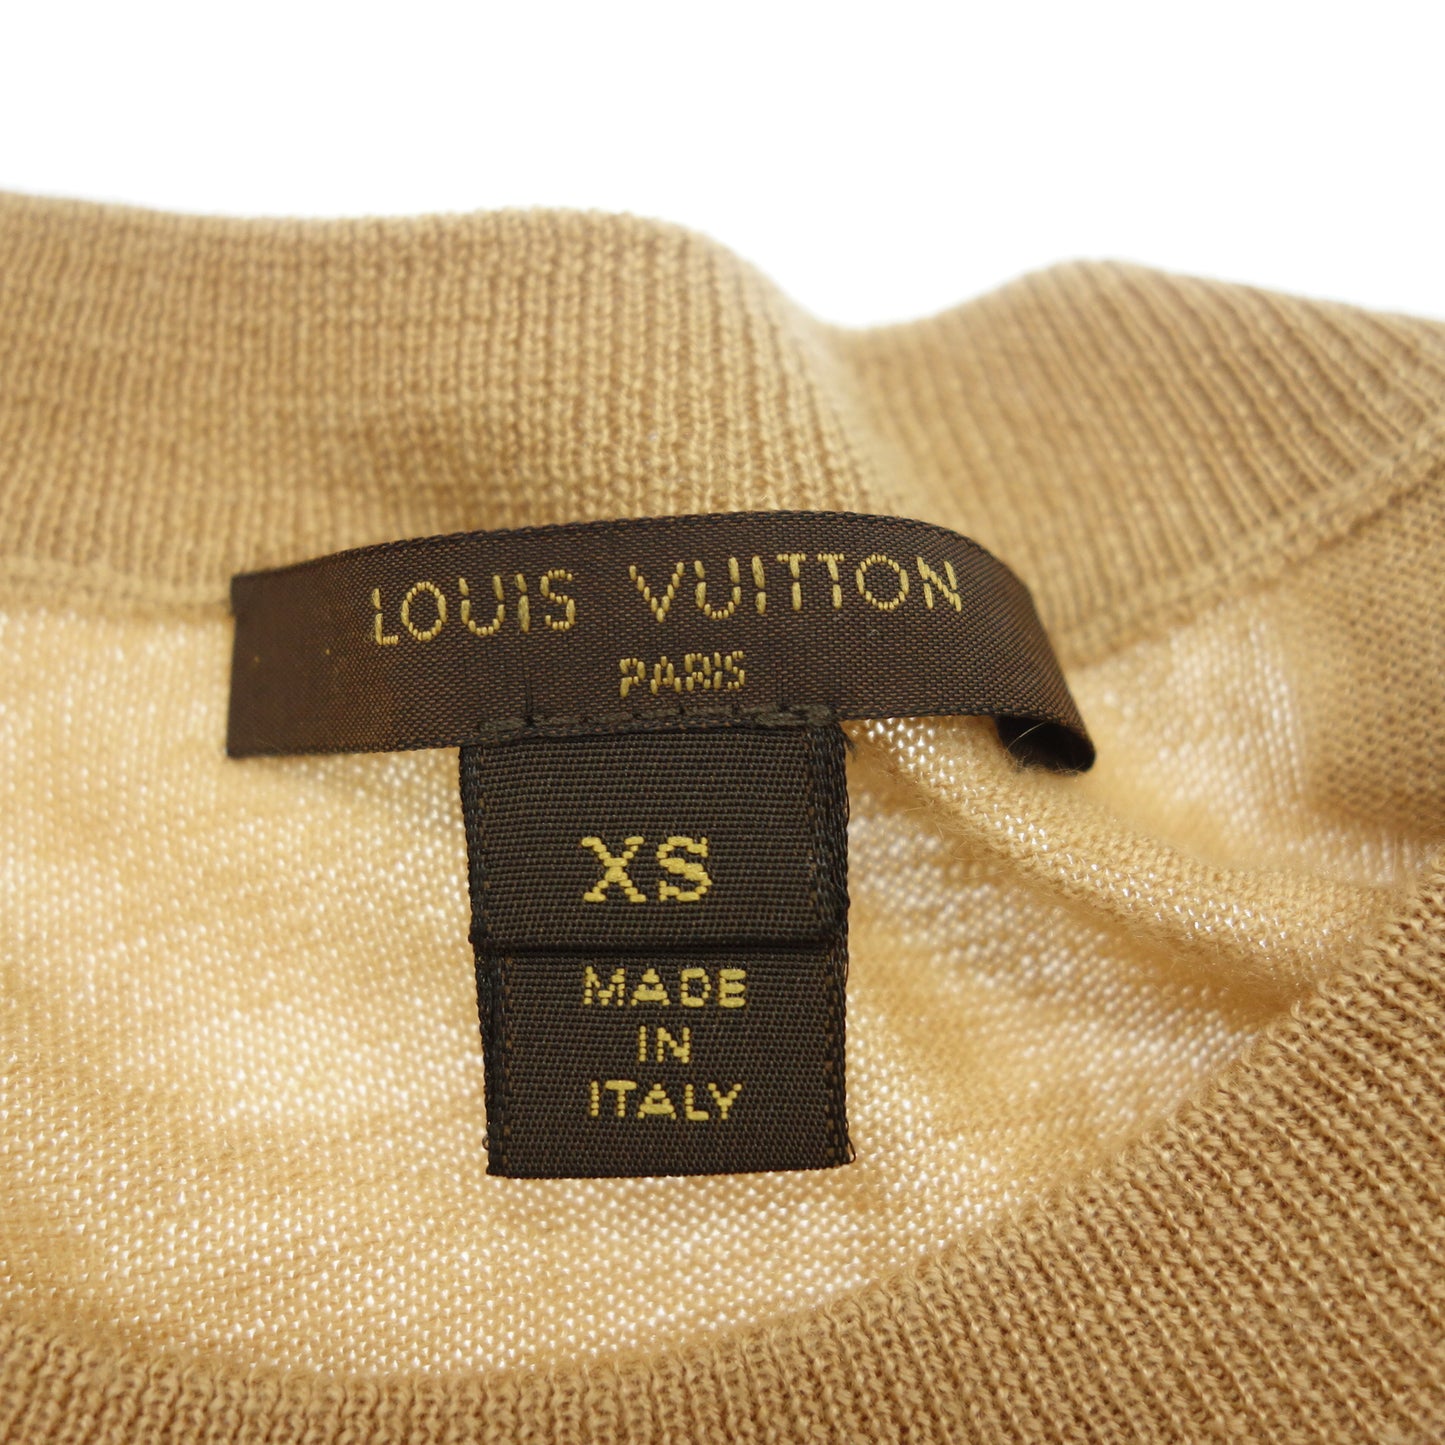 Good Condition◆Louis Vuitton Knit Sweater LV Embroidery Women's Gold Size XS LOUIS VUITTON [AFB30] 